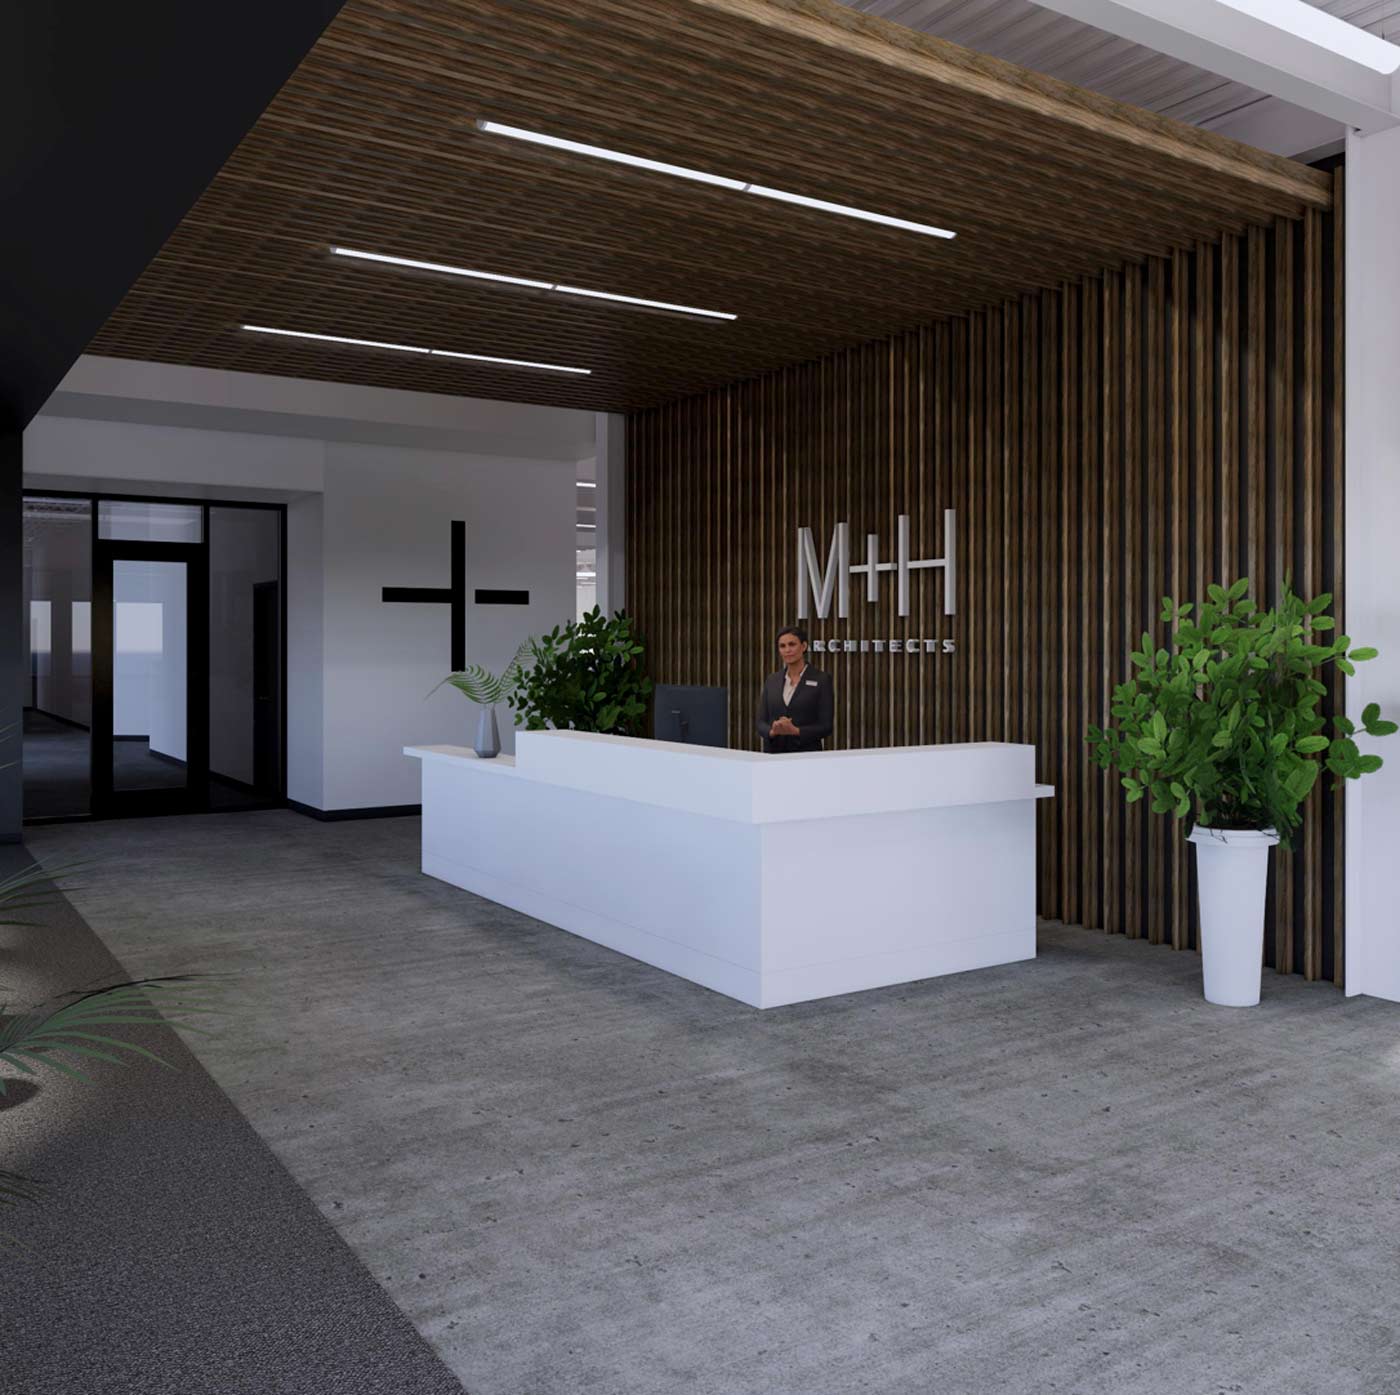 A mockup of the new M+H office with the logo behind the receptionists desk